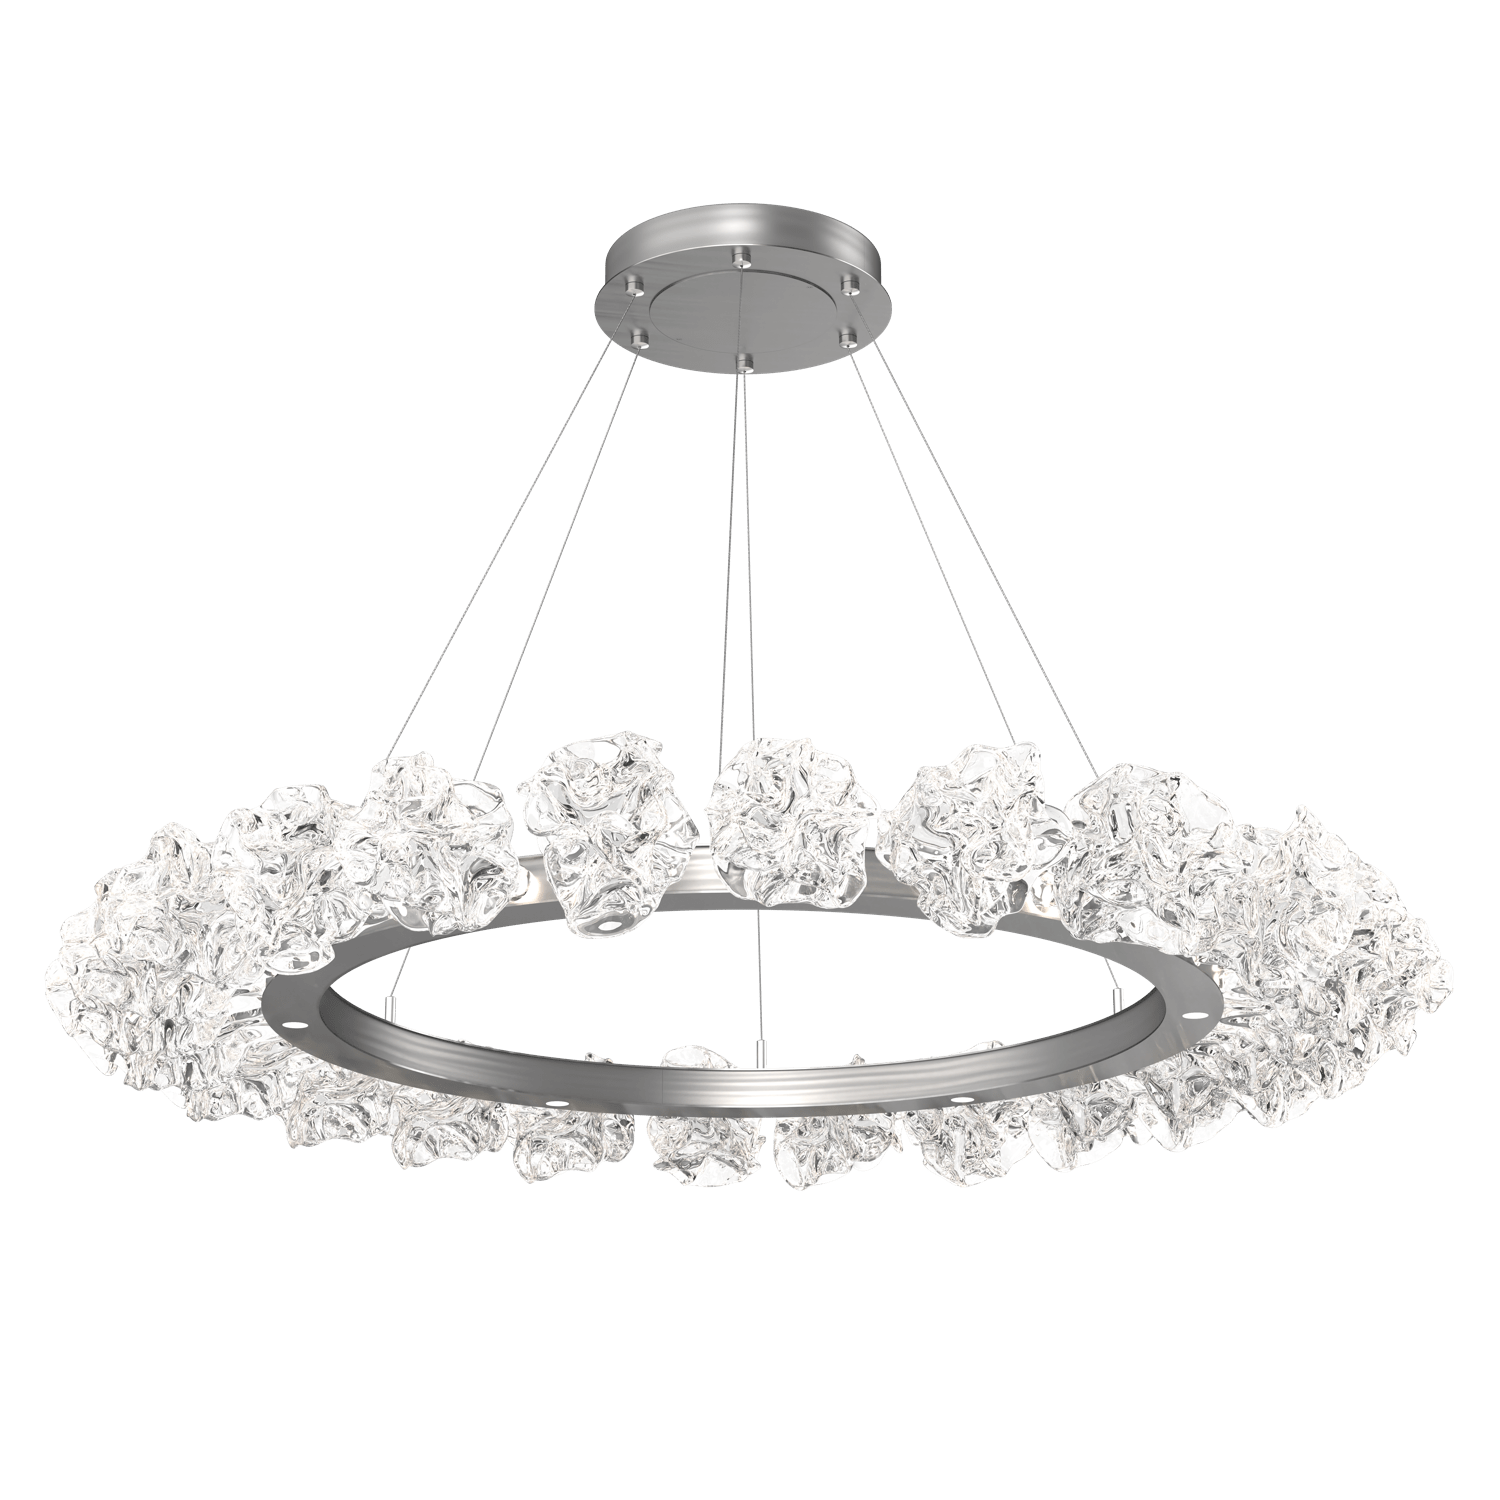 CHB0059-50-SN-Hammerton-Studio-Blossom-50-inch-radial-ring-chandelier-with-satin-nickel-finish-and-clear-handblown-crystal-glass-shades-and-LED-lamping